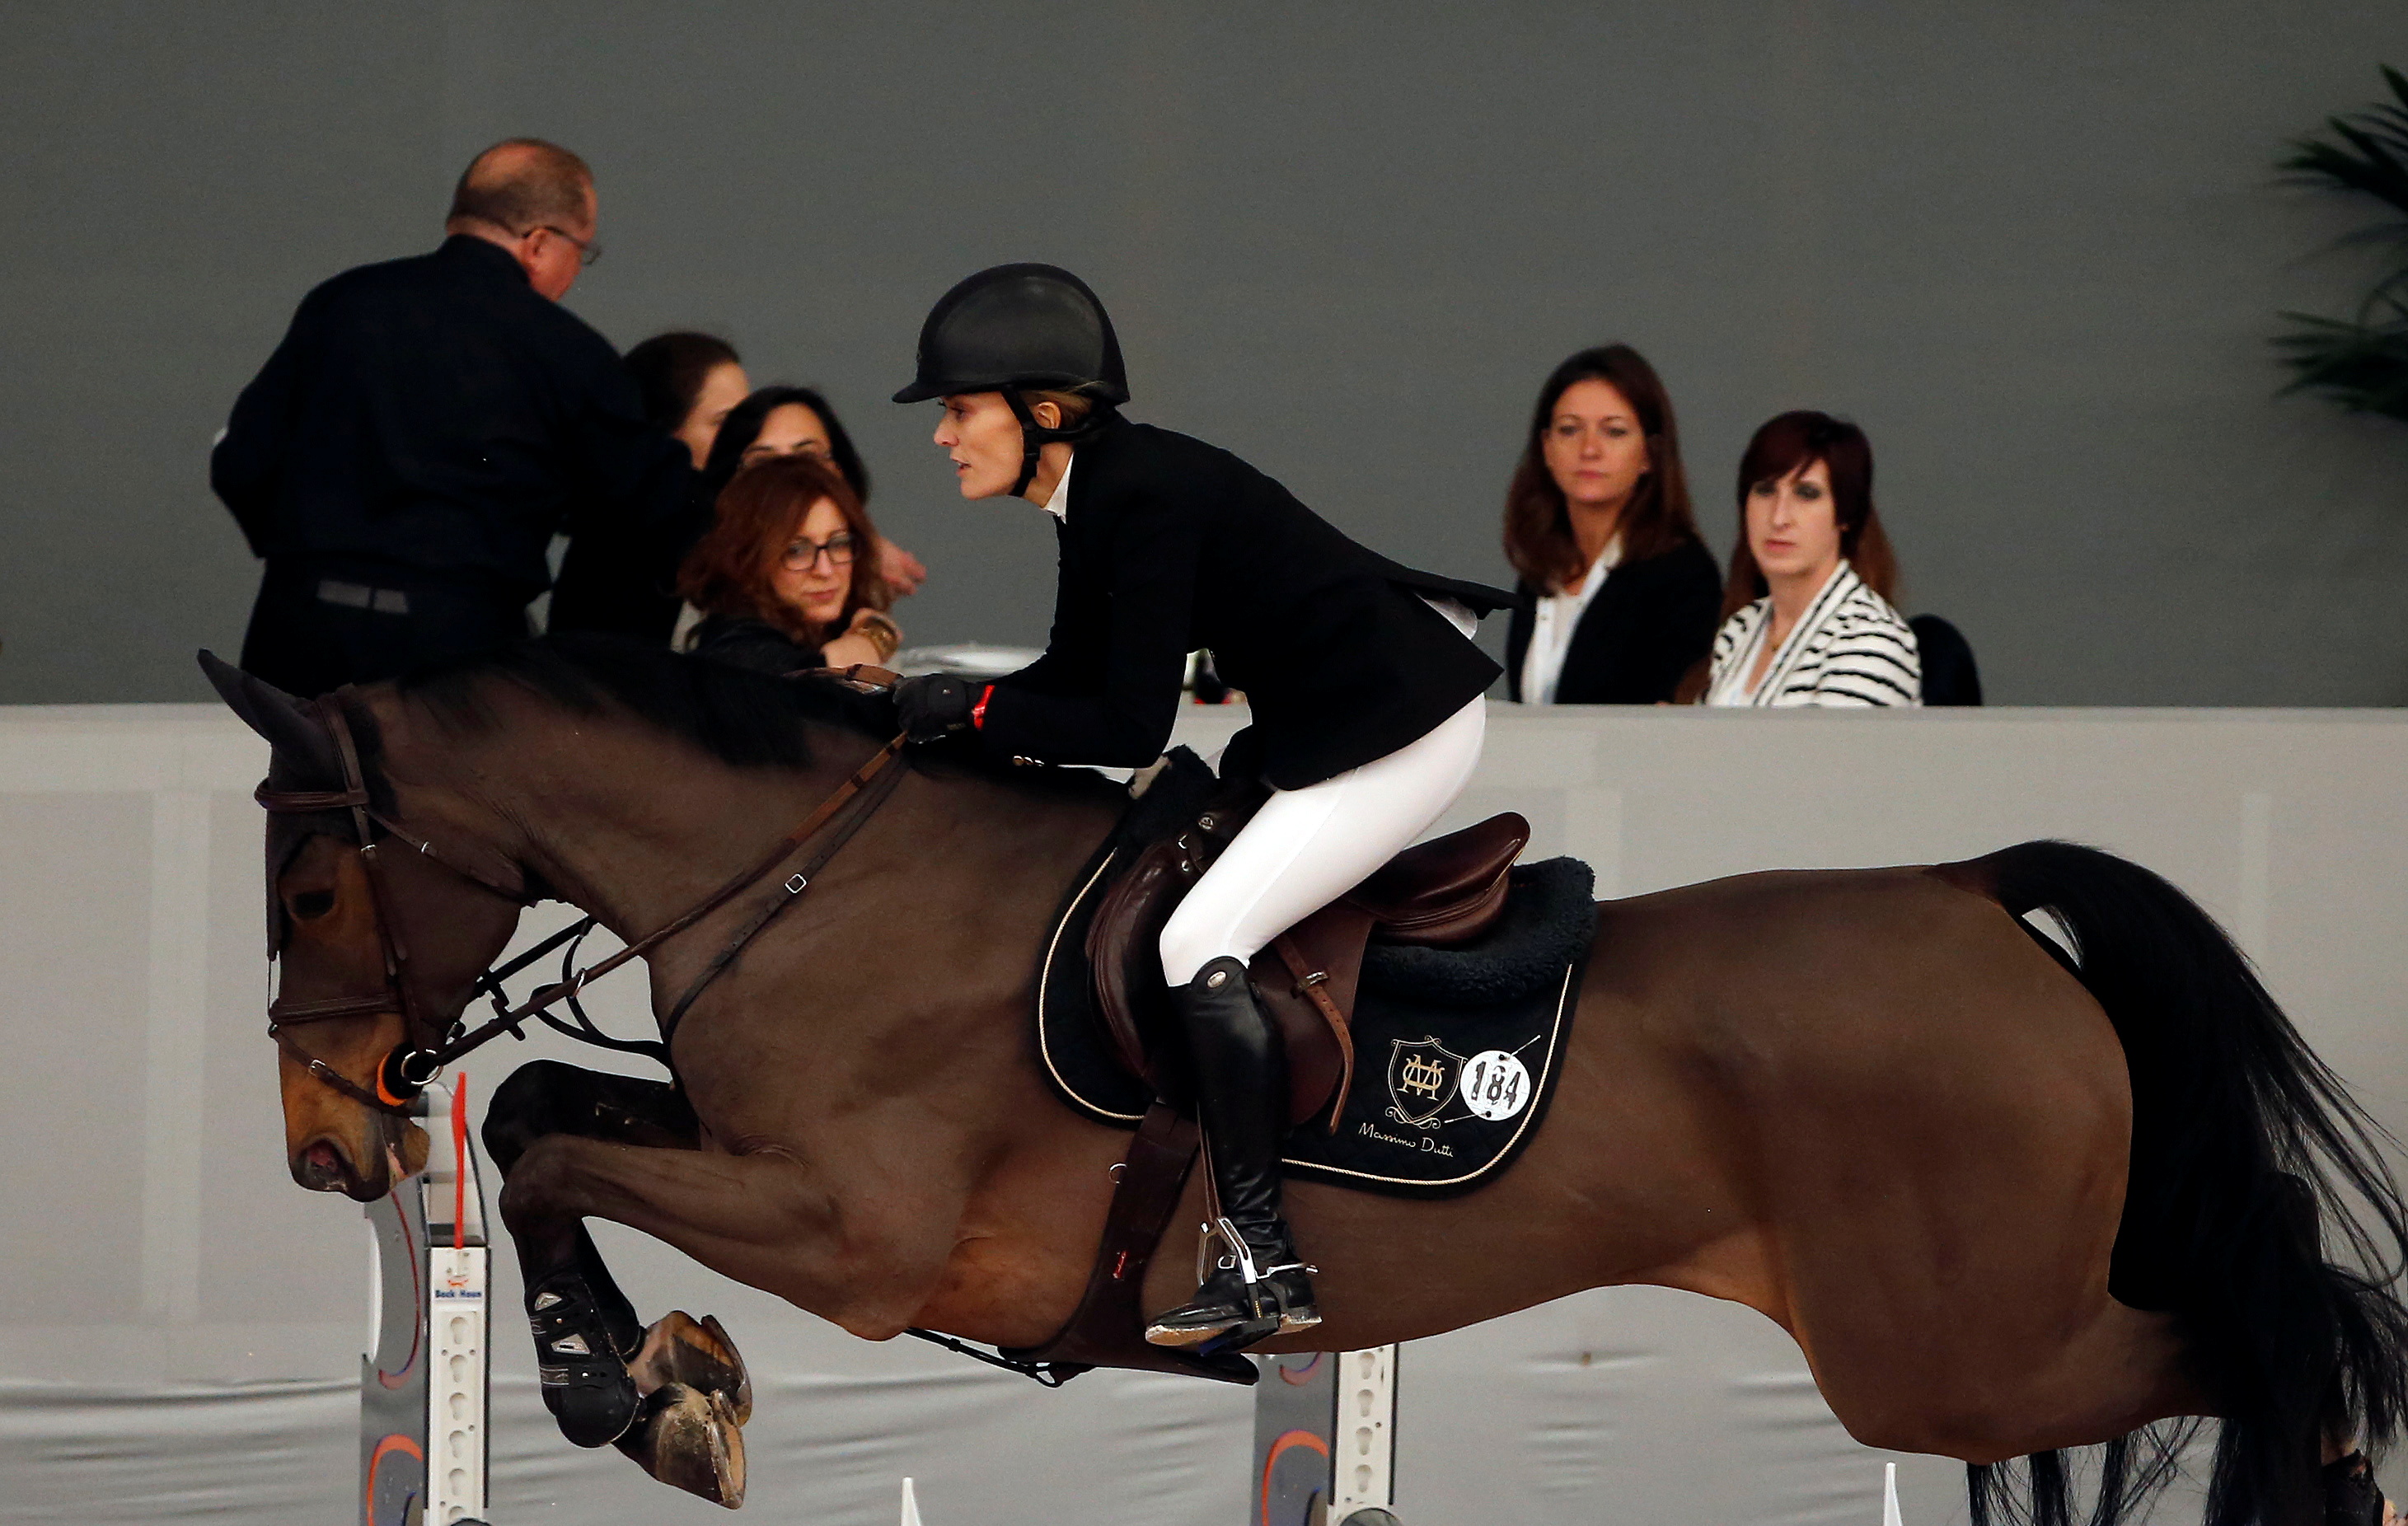 Marta Ortega, daughter of Amancio Ortega, founder and former chairman of Spanish global fashion group Inditex, competes during Madrid Horse Week in Madrid